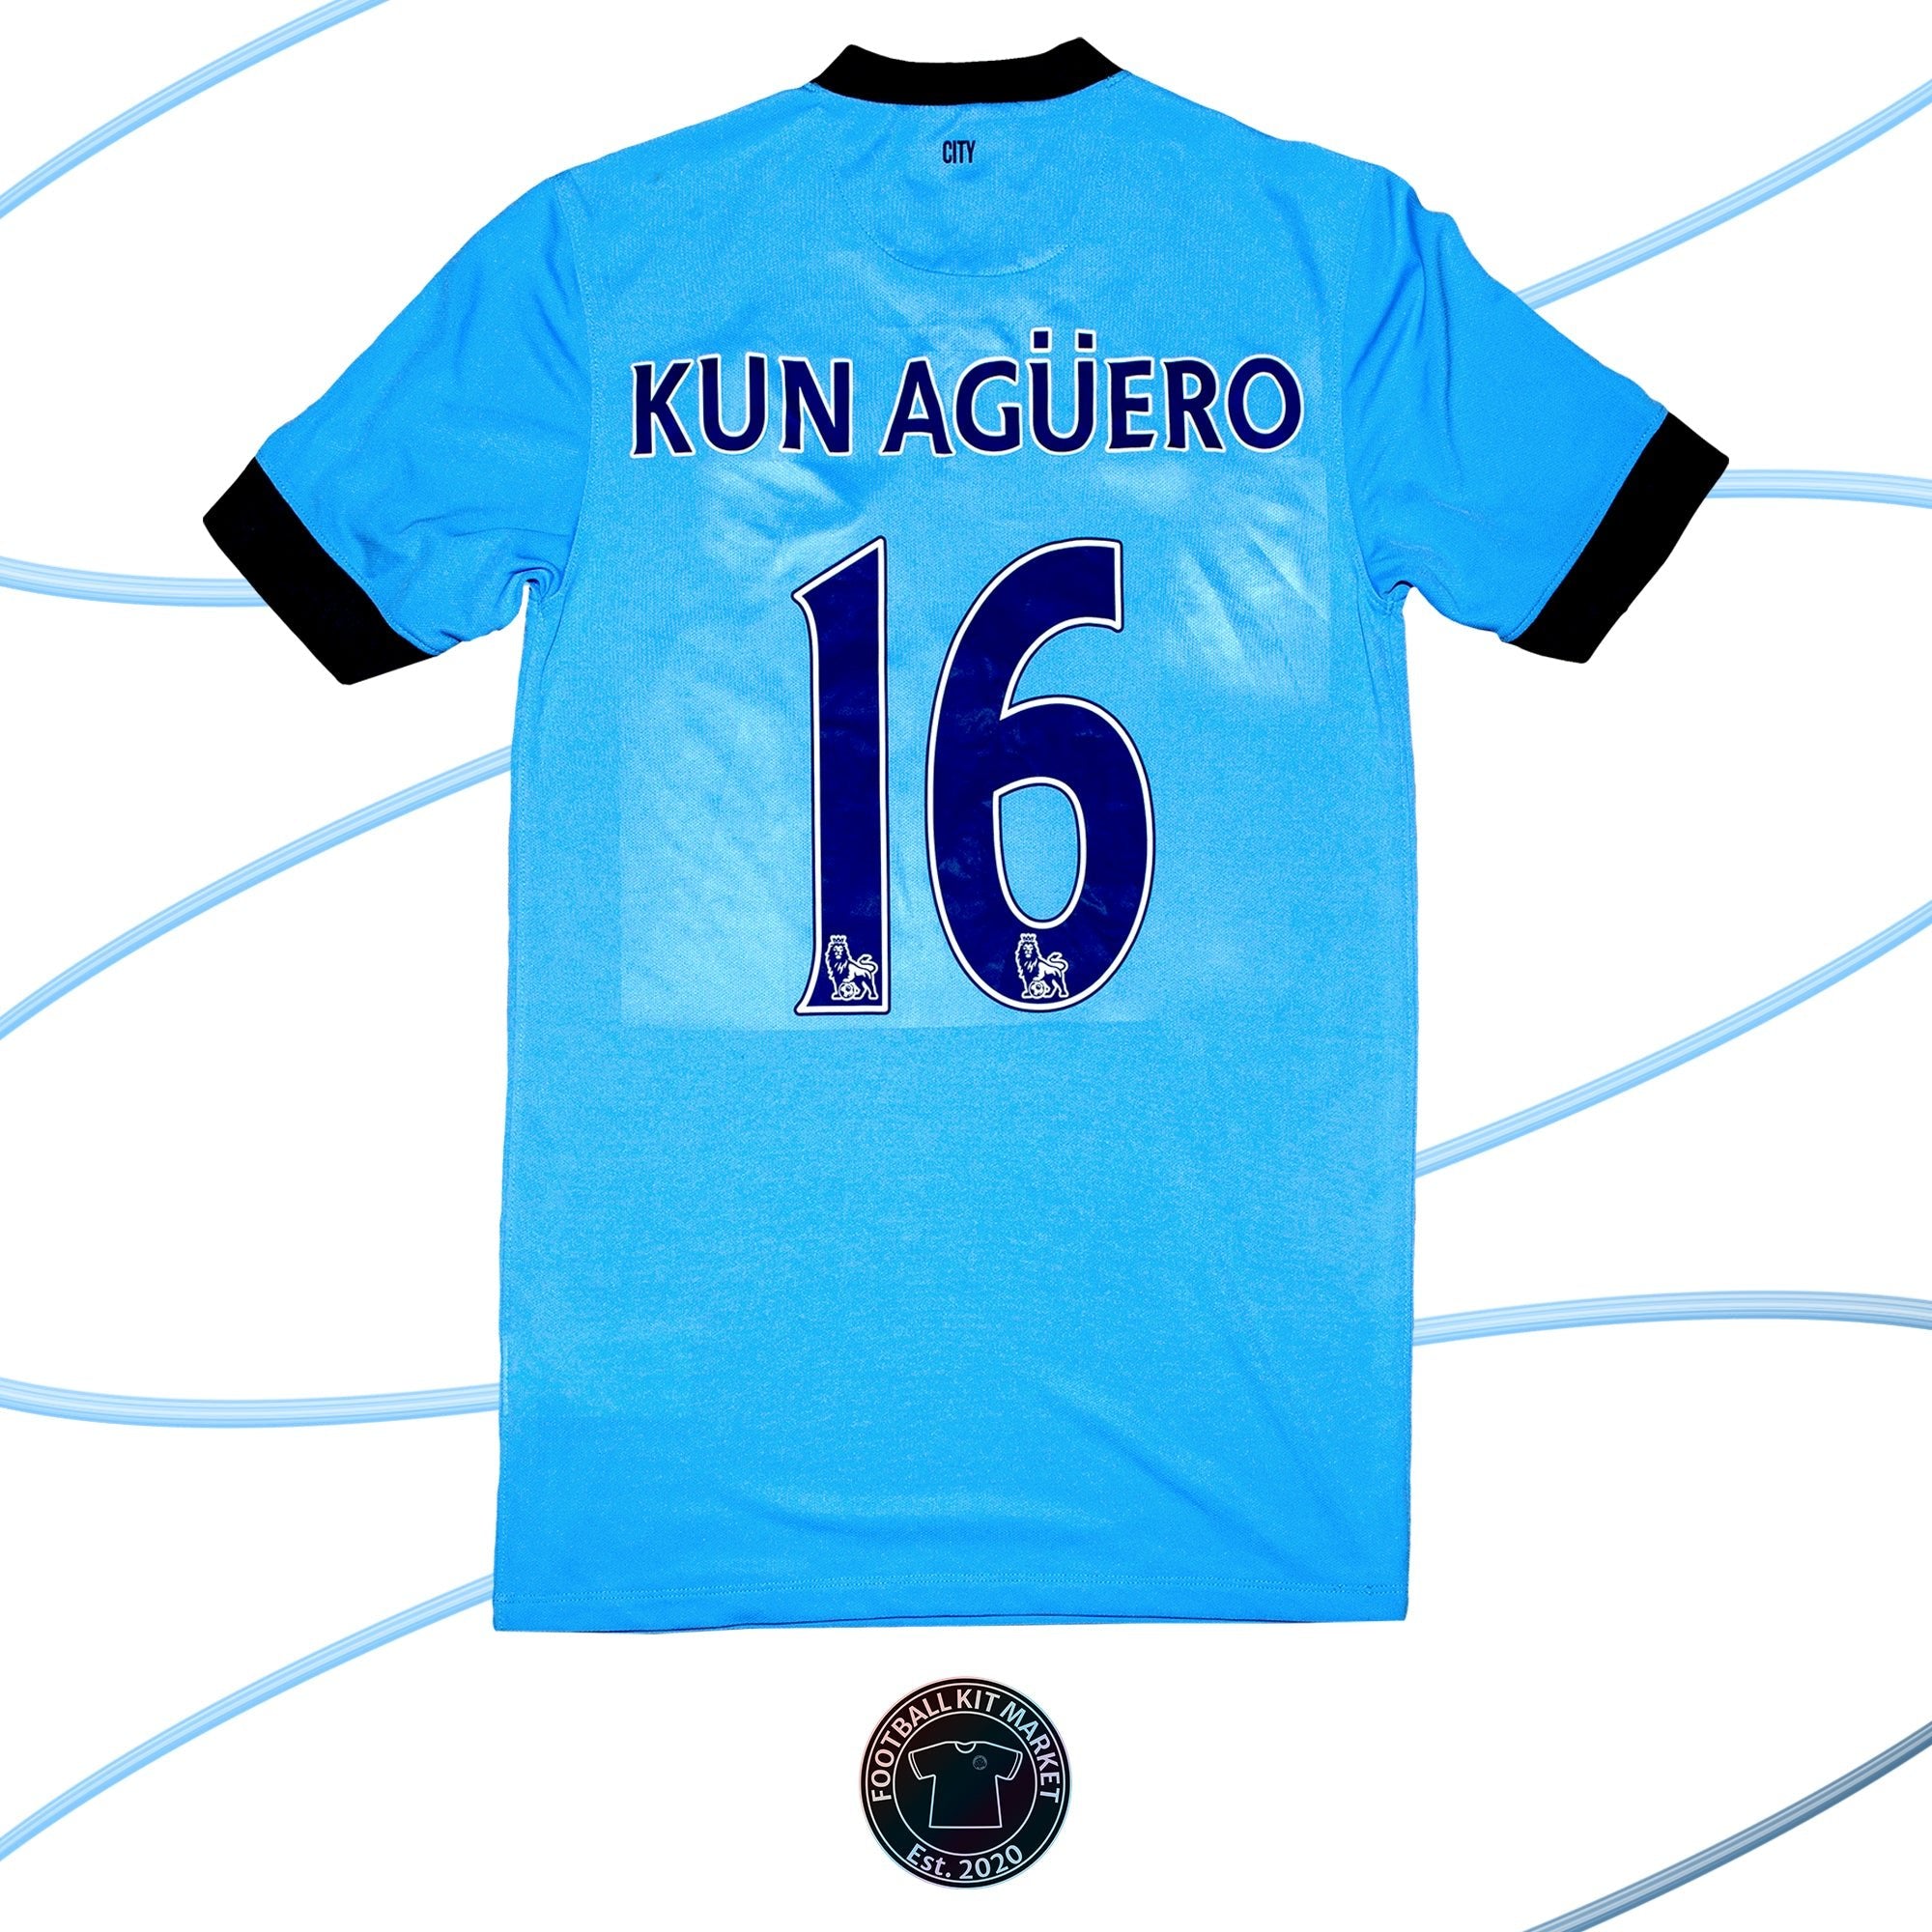 Genuine MANCHESTER CITY Home Shirt KUN AGUERO (2014-2015) - NIKE (S) - Product Image from Football Kit Market